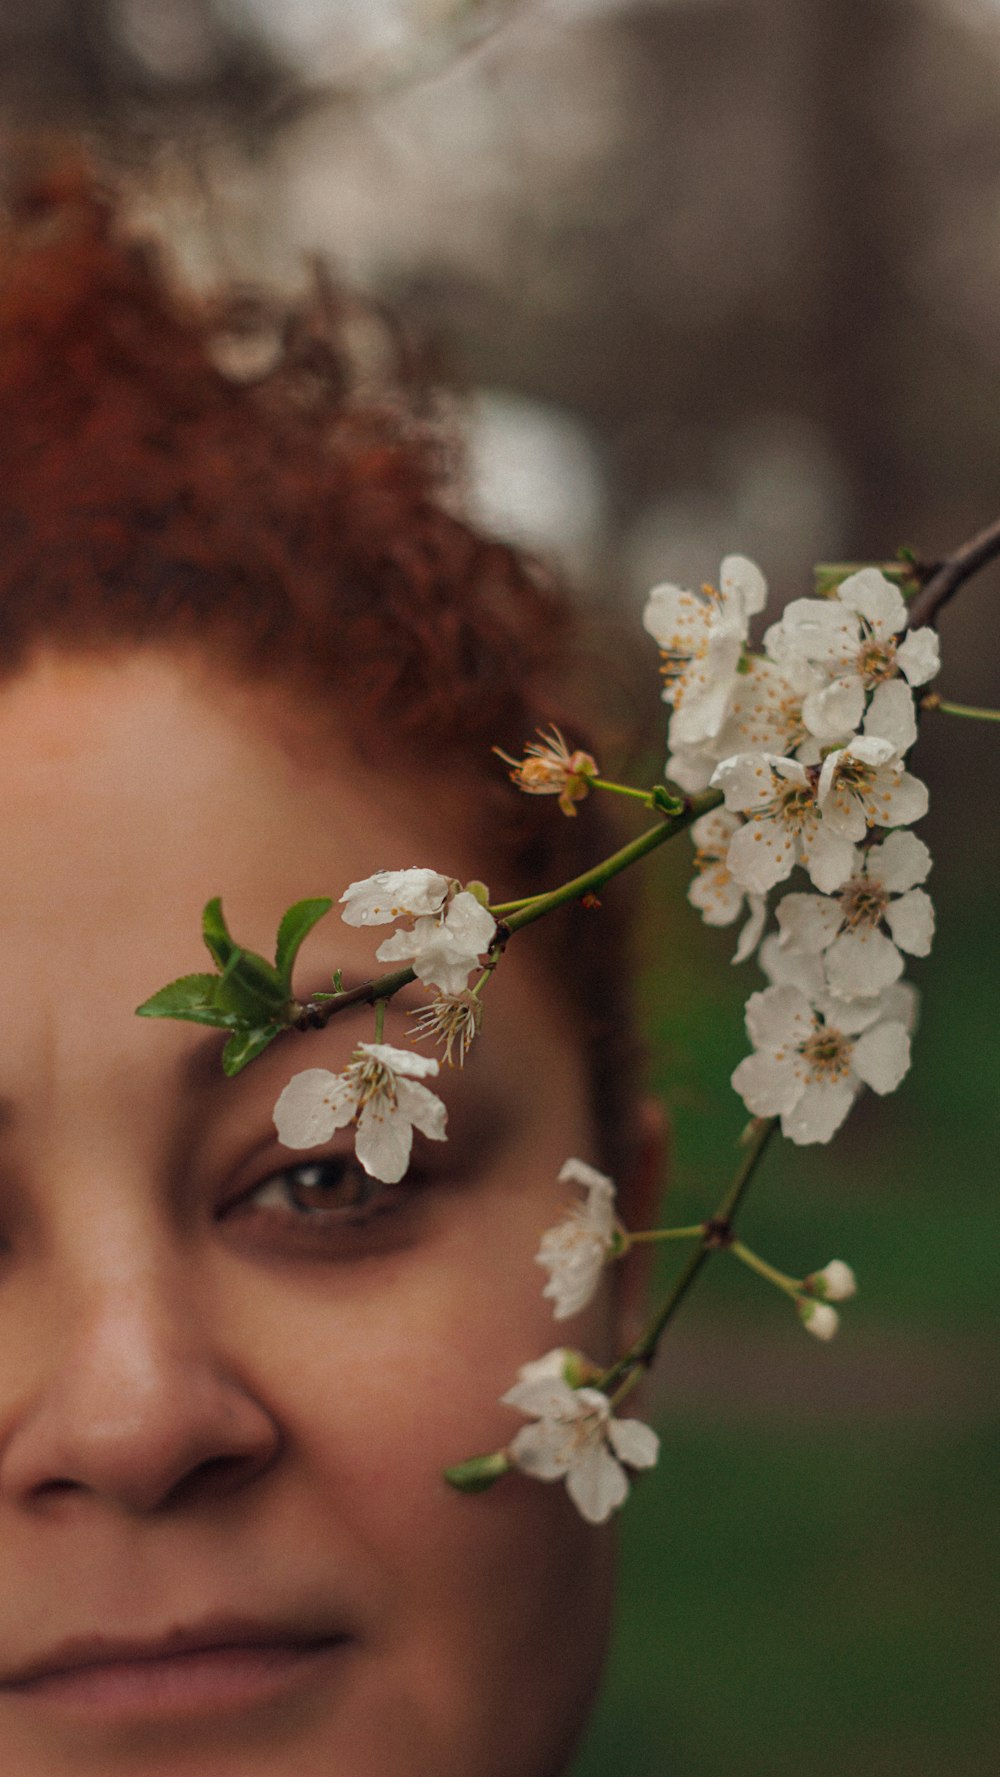 a woman with red hair and a flower on her forehead